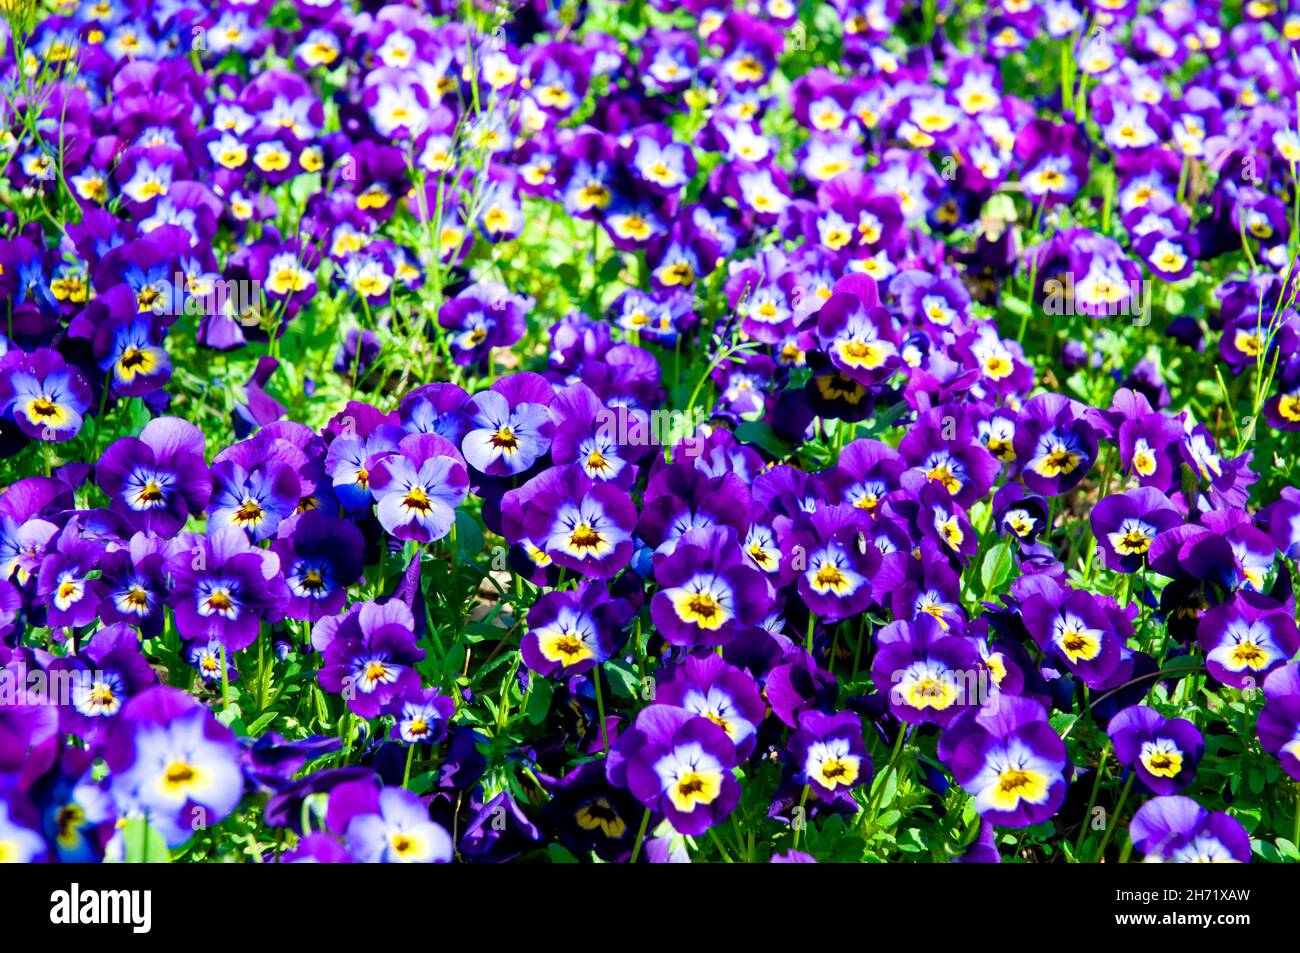 Pansy flowers. Stock Photo